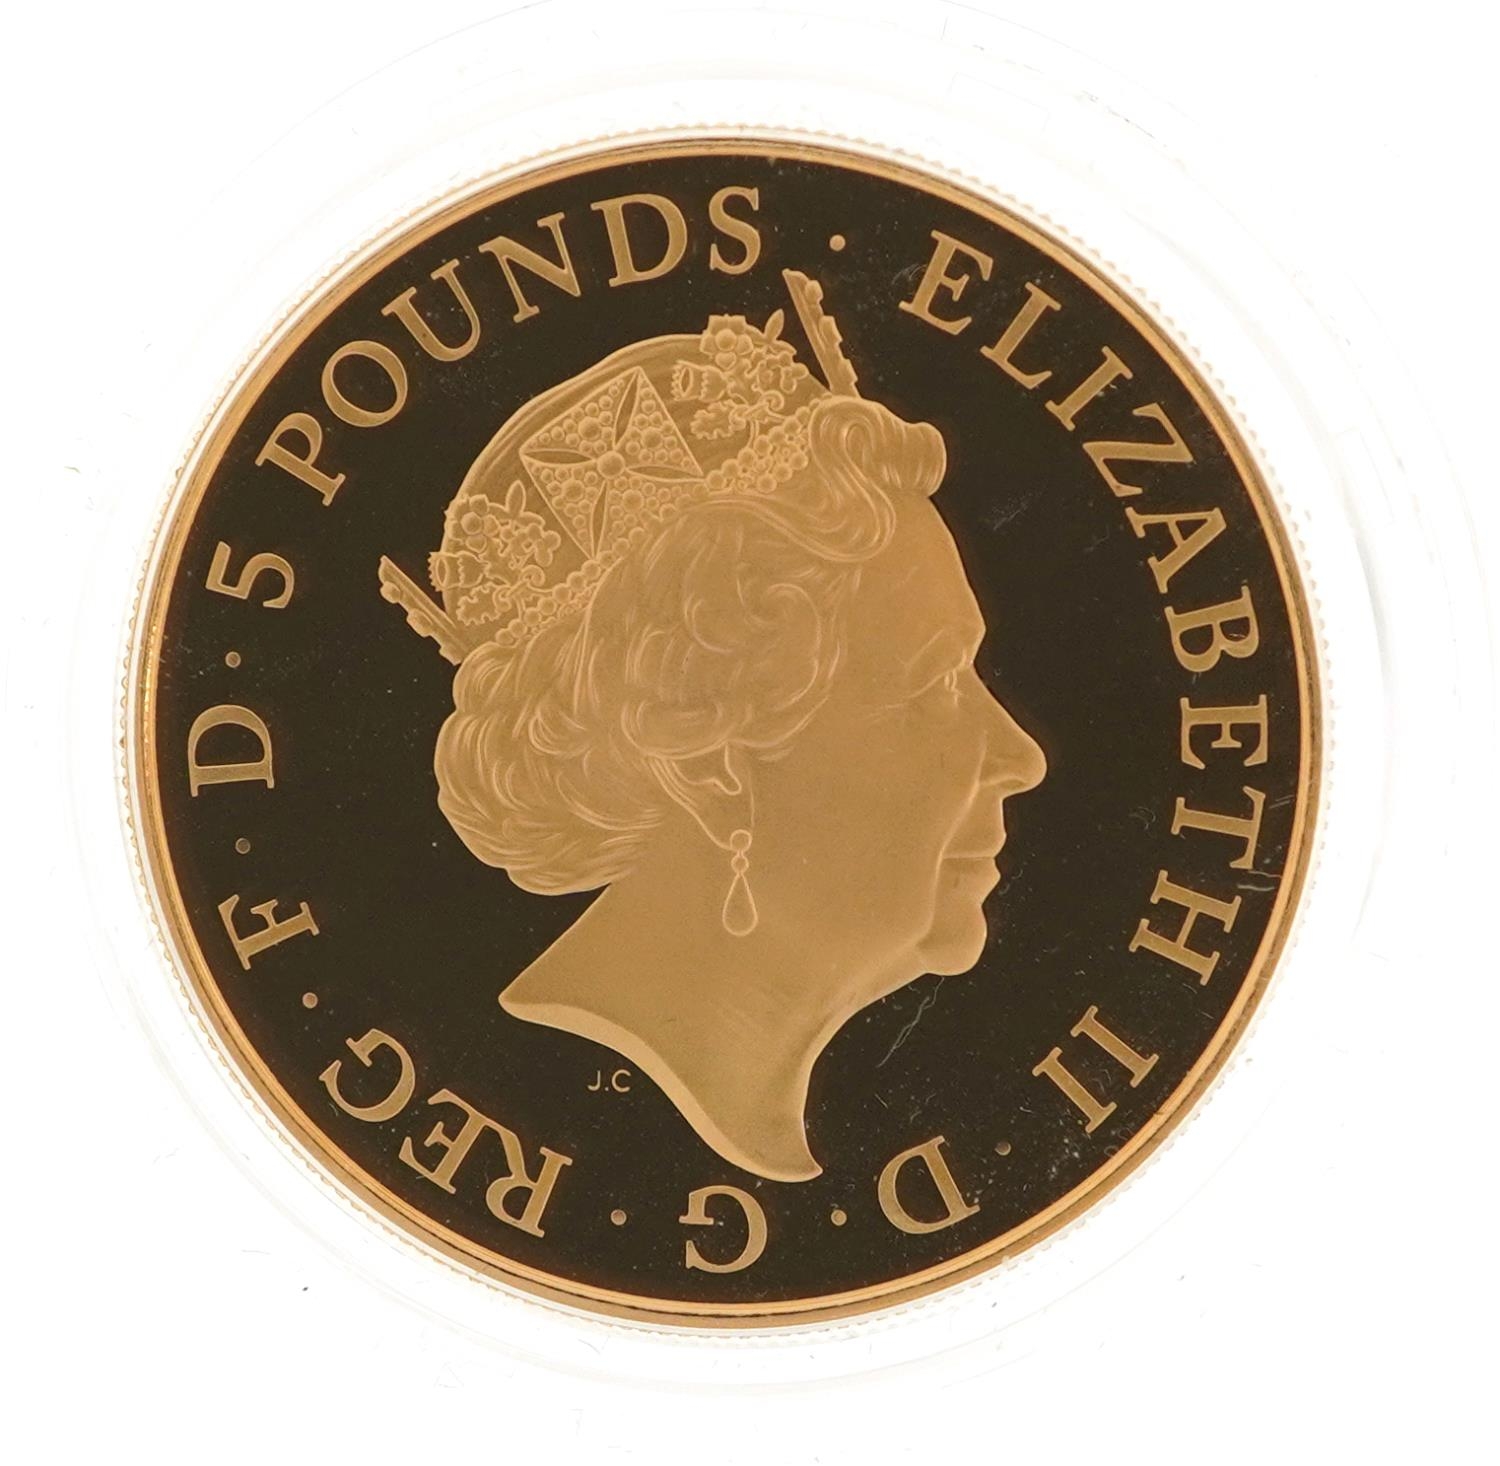 Elizabeth II 2015 gold proof five pound coin commemorating the christening of HRH Princess Charlotte - Image 3 of 4